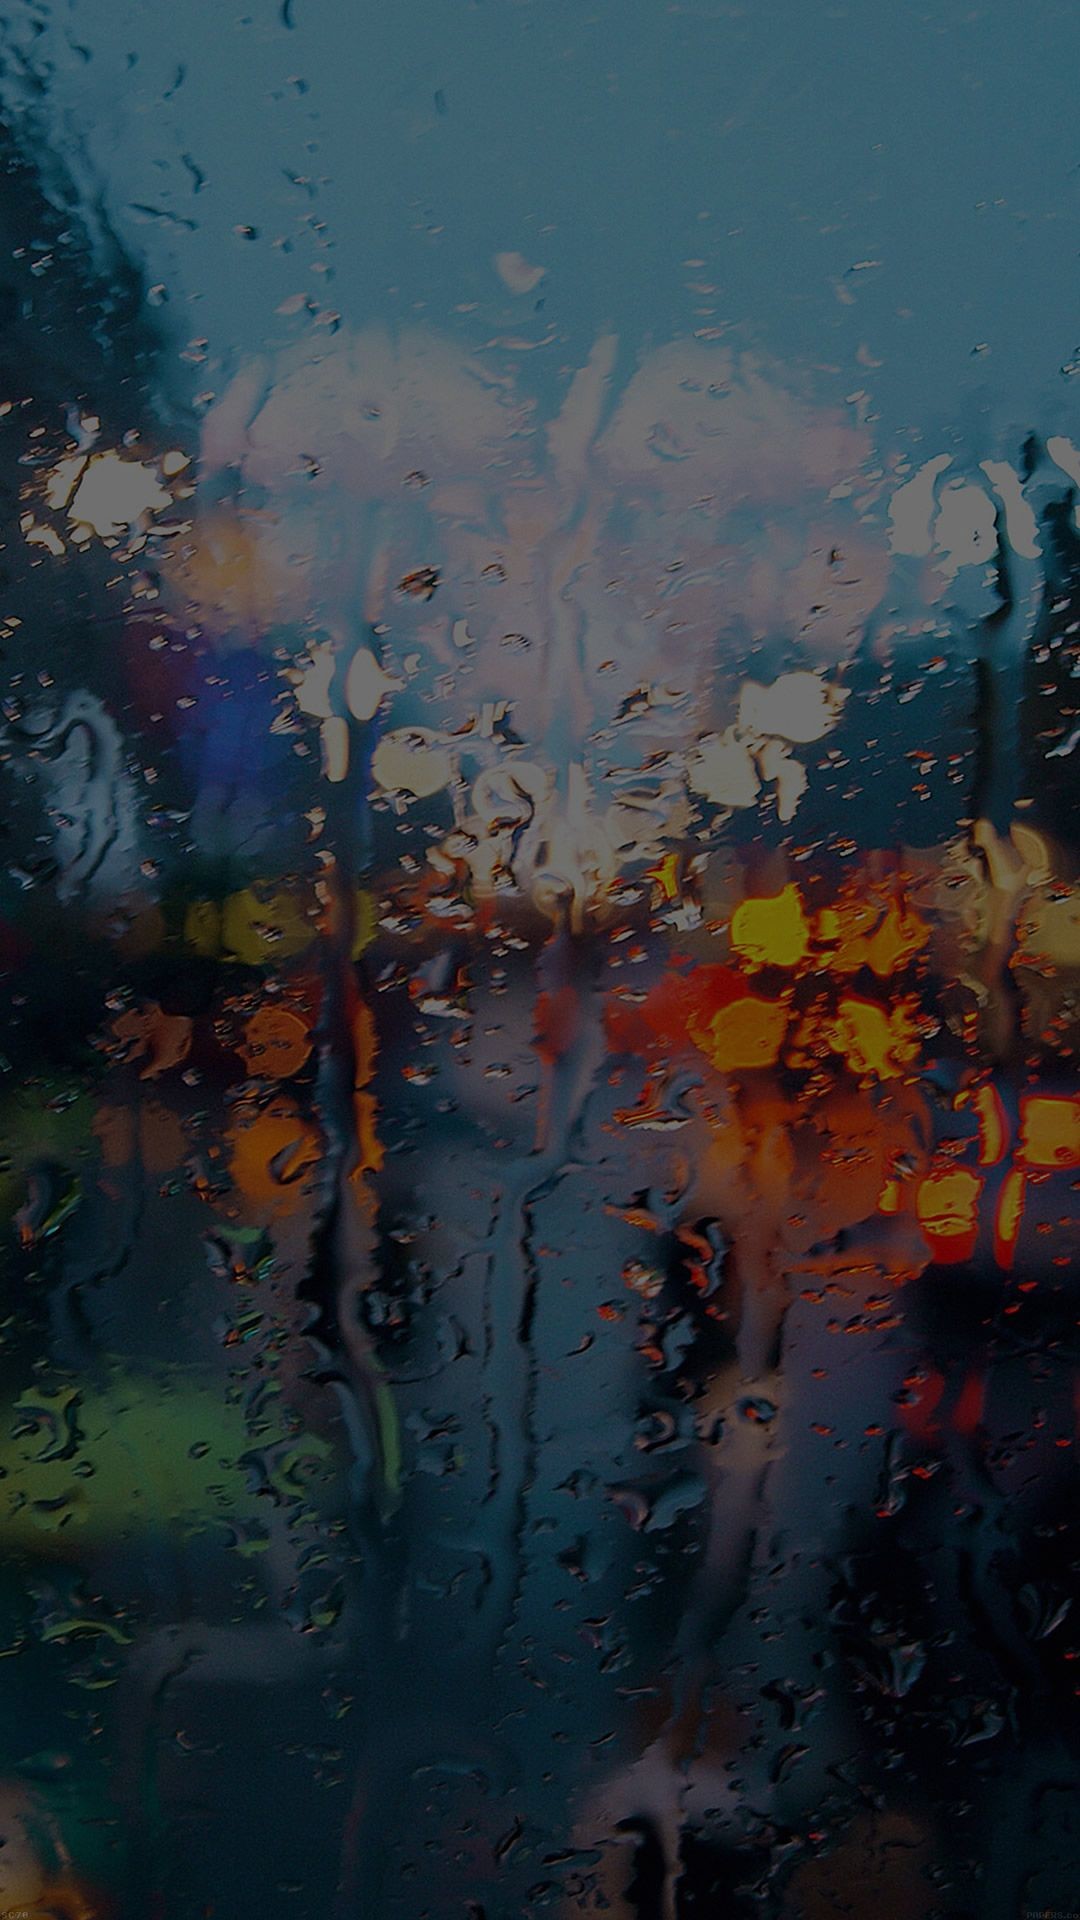 Rainy Day Wallpaper - Rainy Day Wallpaper Iphone , HD Wallpaper & Backgrounds